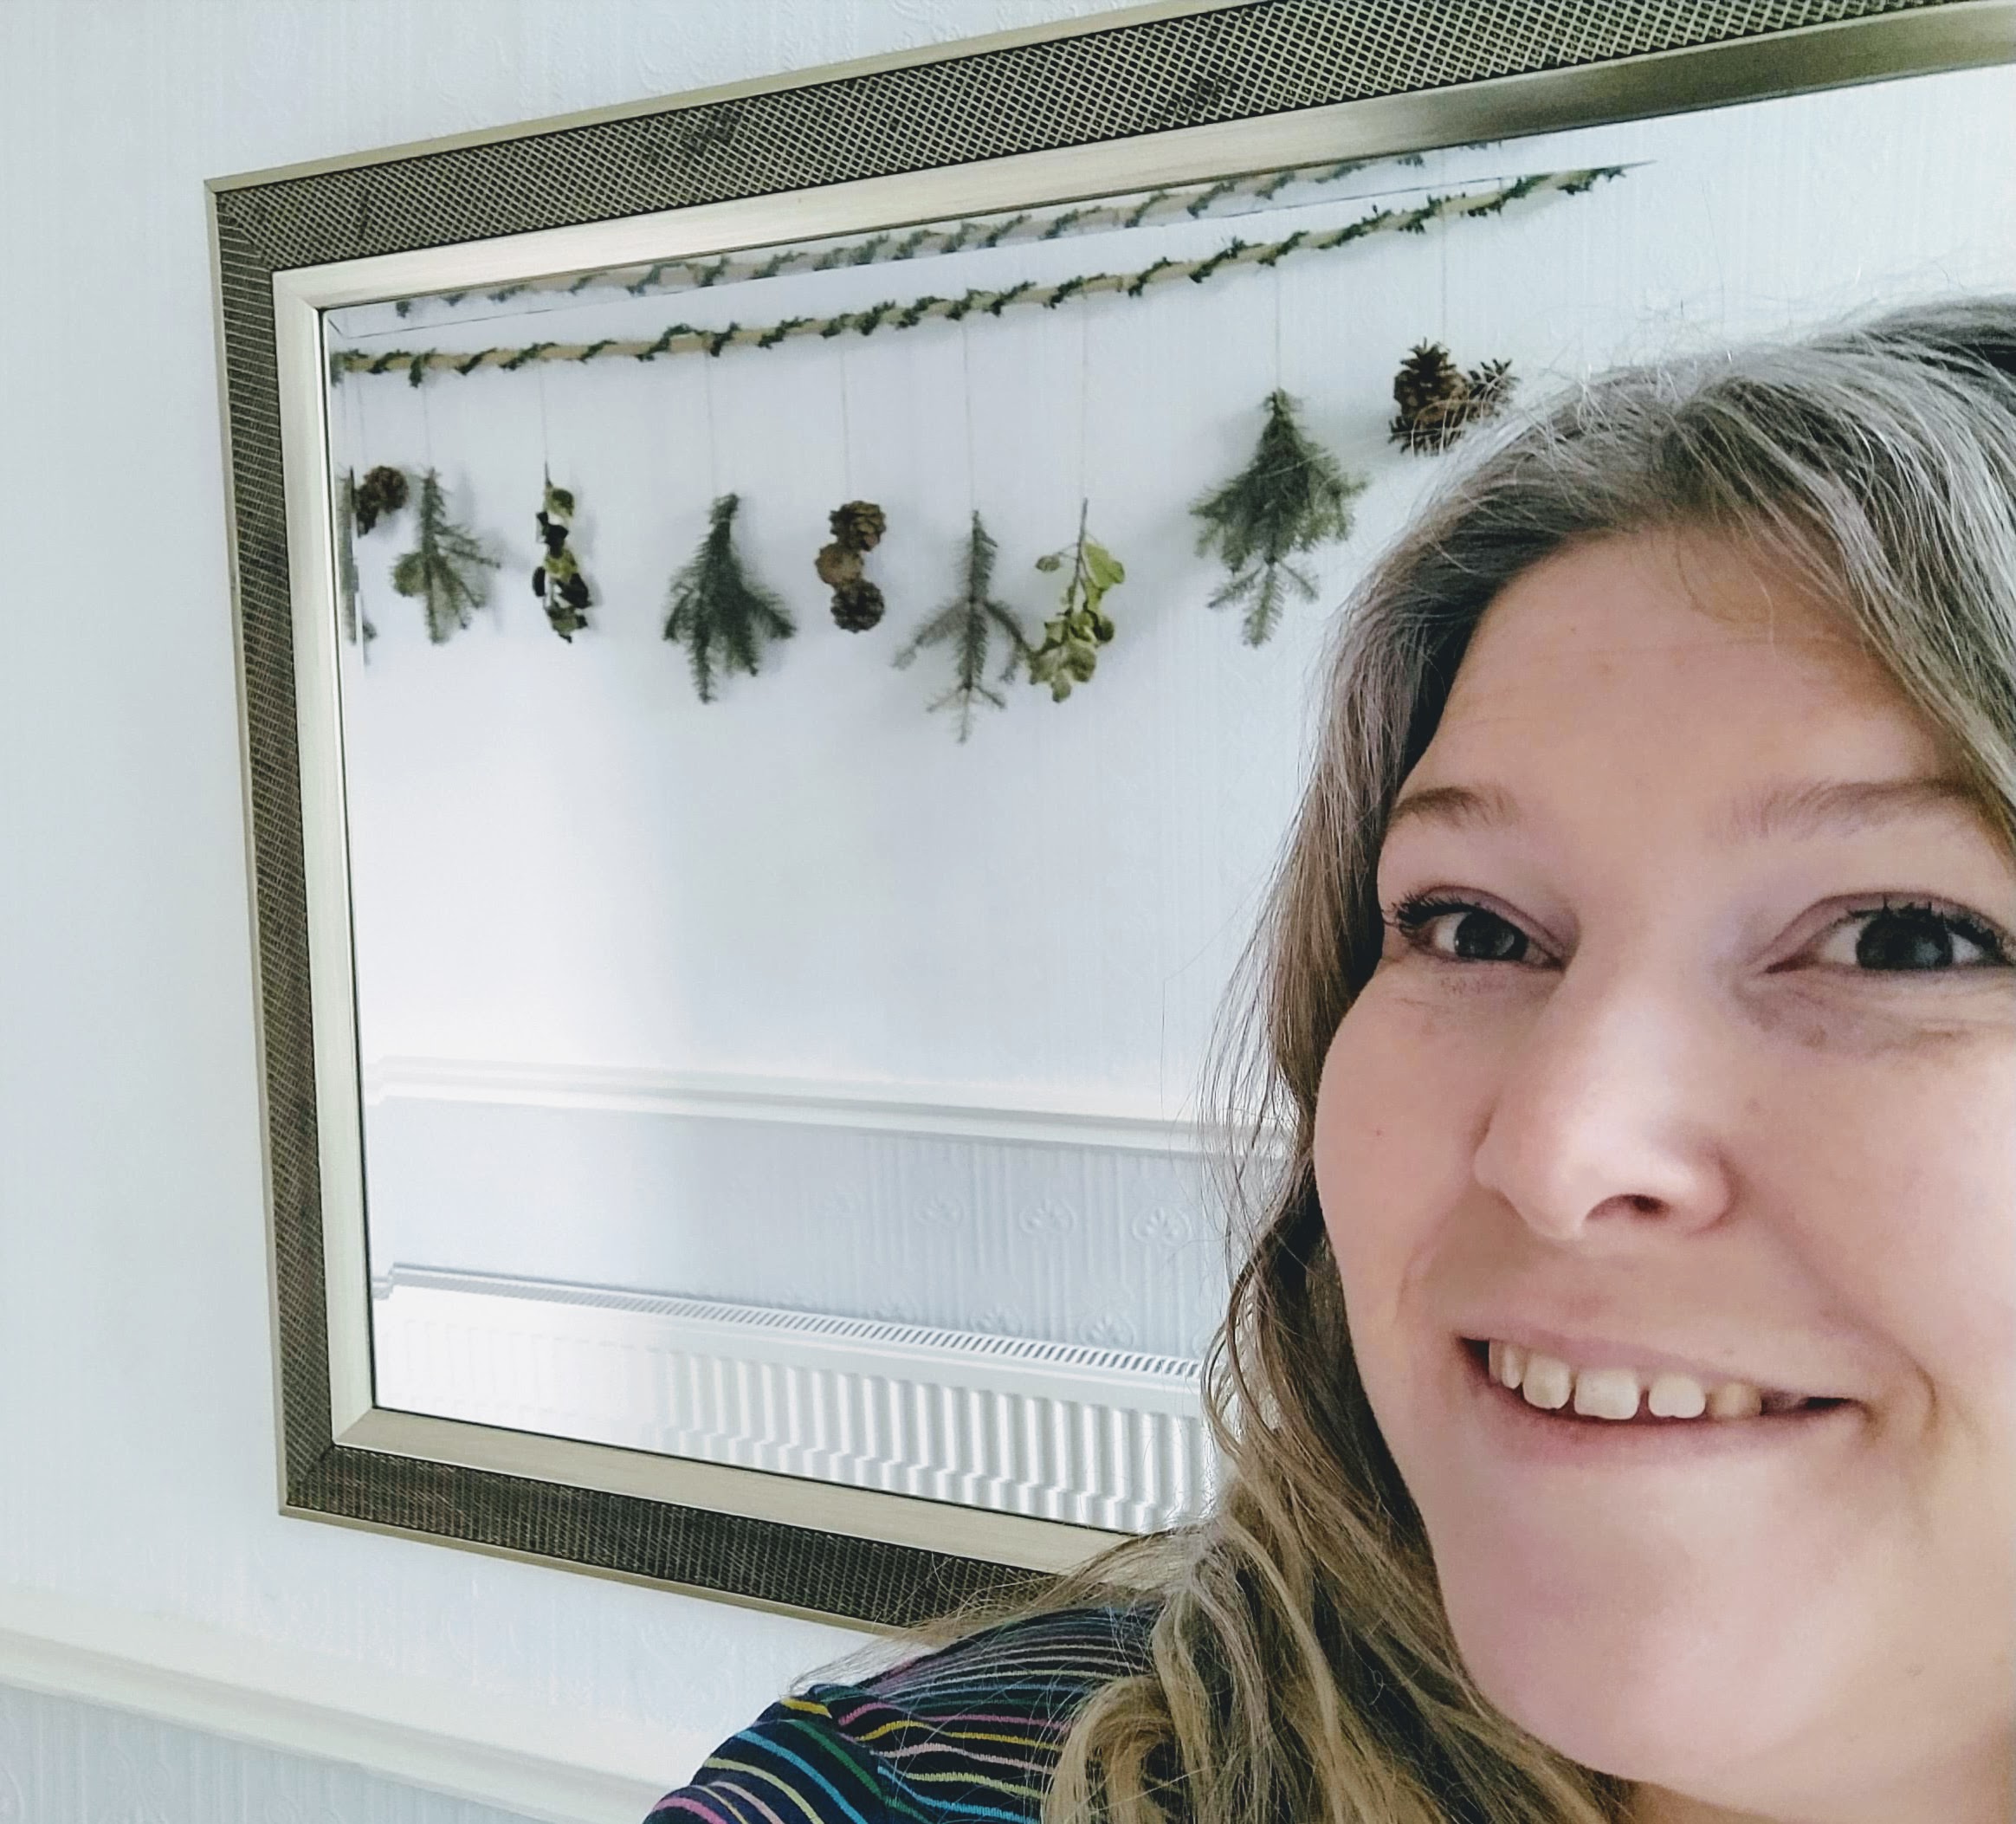 A bamboo cane wrapped in leaf wine hung in a hallway. Hanging from it with twine are pine branches, pine cones and holly twigs. This is reflected in a bronzed framed mirror with a middle aged women smiling in the frame. She looks tired and is unphotogenic but proud